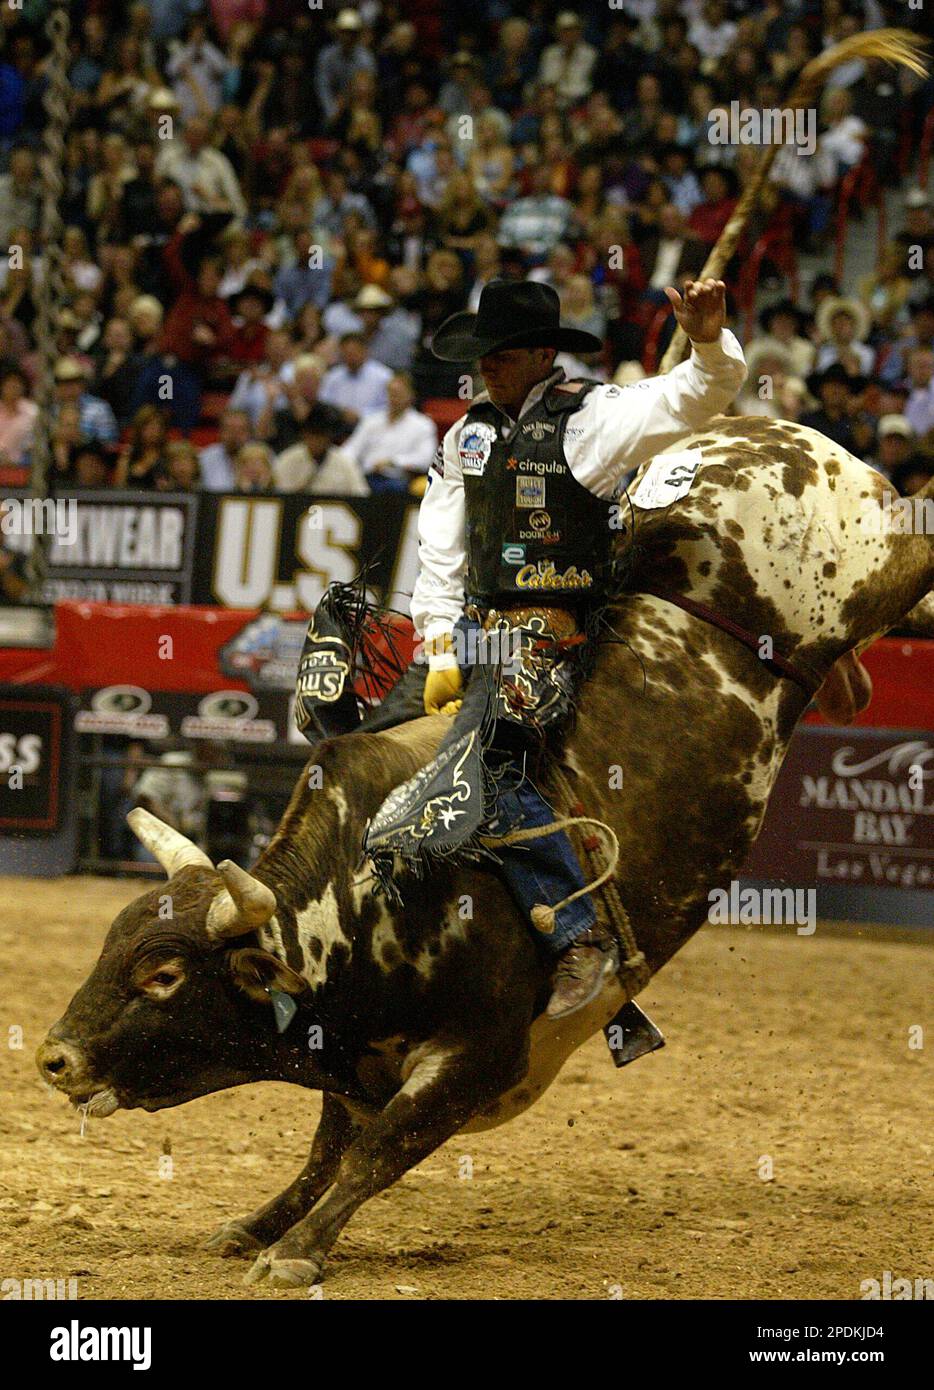 https://c8.alamy.com/comp/2PDKJD4/justin-mcbride-of-elk-city-okla-hangs-on-a-bull-as-he-competes-during-the-sixth-round-of-professional-bull-riders-world-finals-in-las-vegas-on-saturday-nov-5-2005-mcbride-who-scored-8725-saturday-is-leading-the-competition-in-overall-points-ap-photojae-c-hong-2PDKJD4.jpg